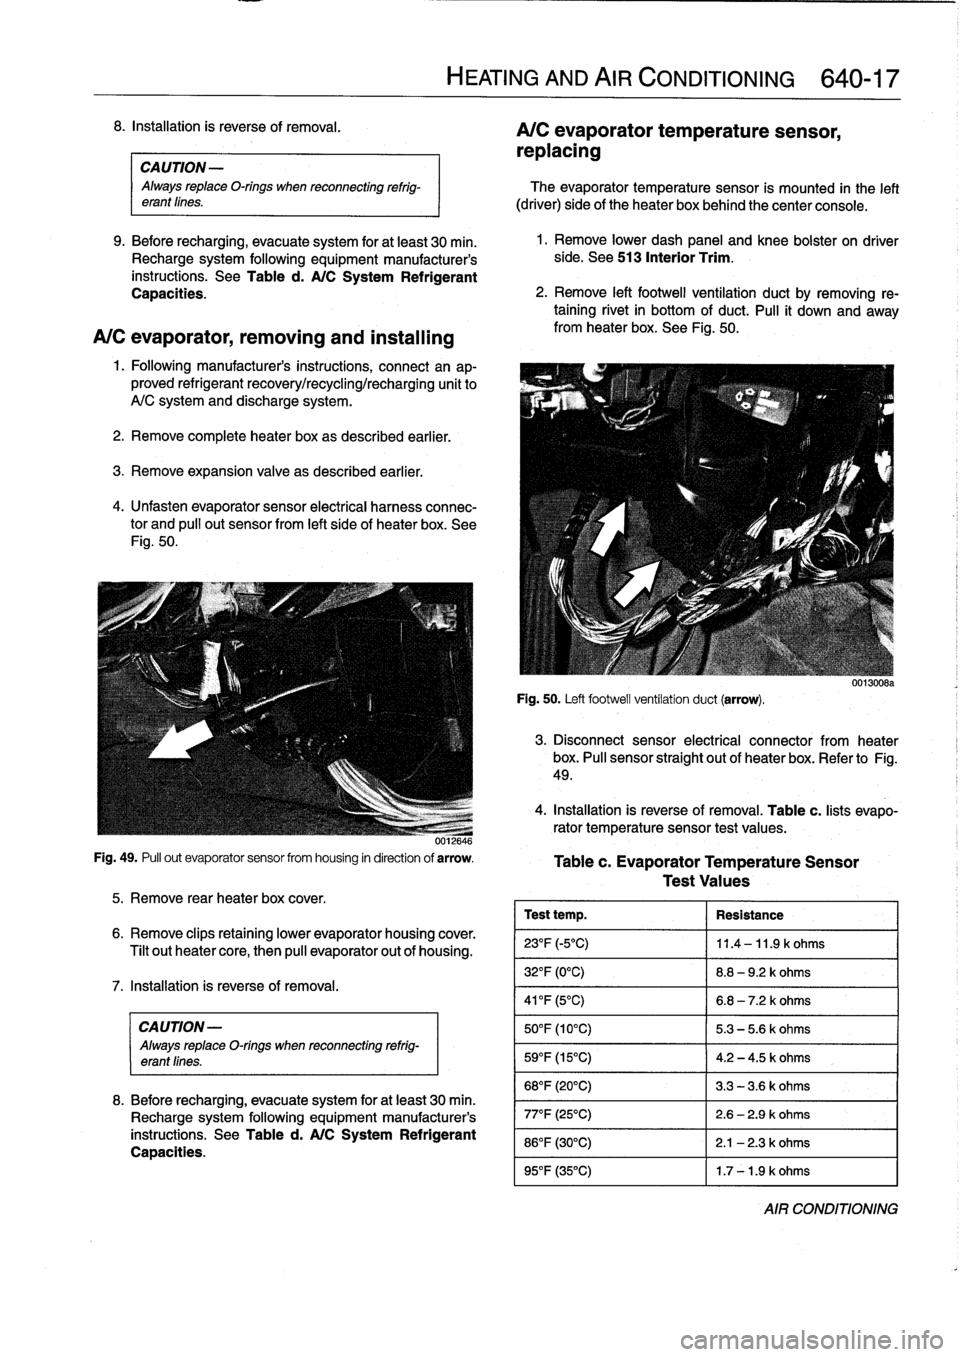 BMW 323i 1993 E36 Owners Manual 
CAUTION
-

Always
replace
O-rings
when
reconnecting
refrig-
erant
fines
.

9
.
Before
recharging,
evacuate
system
for
at
least
30
min
.
Recharge
system
following
equipment
manufacturers
instructions